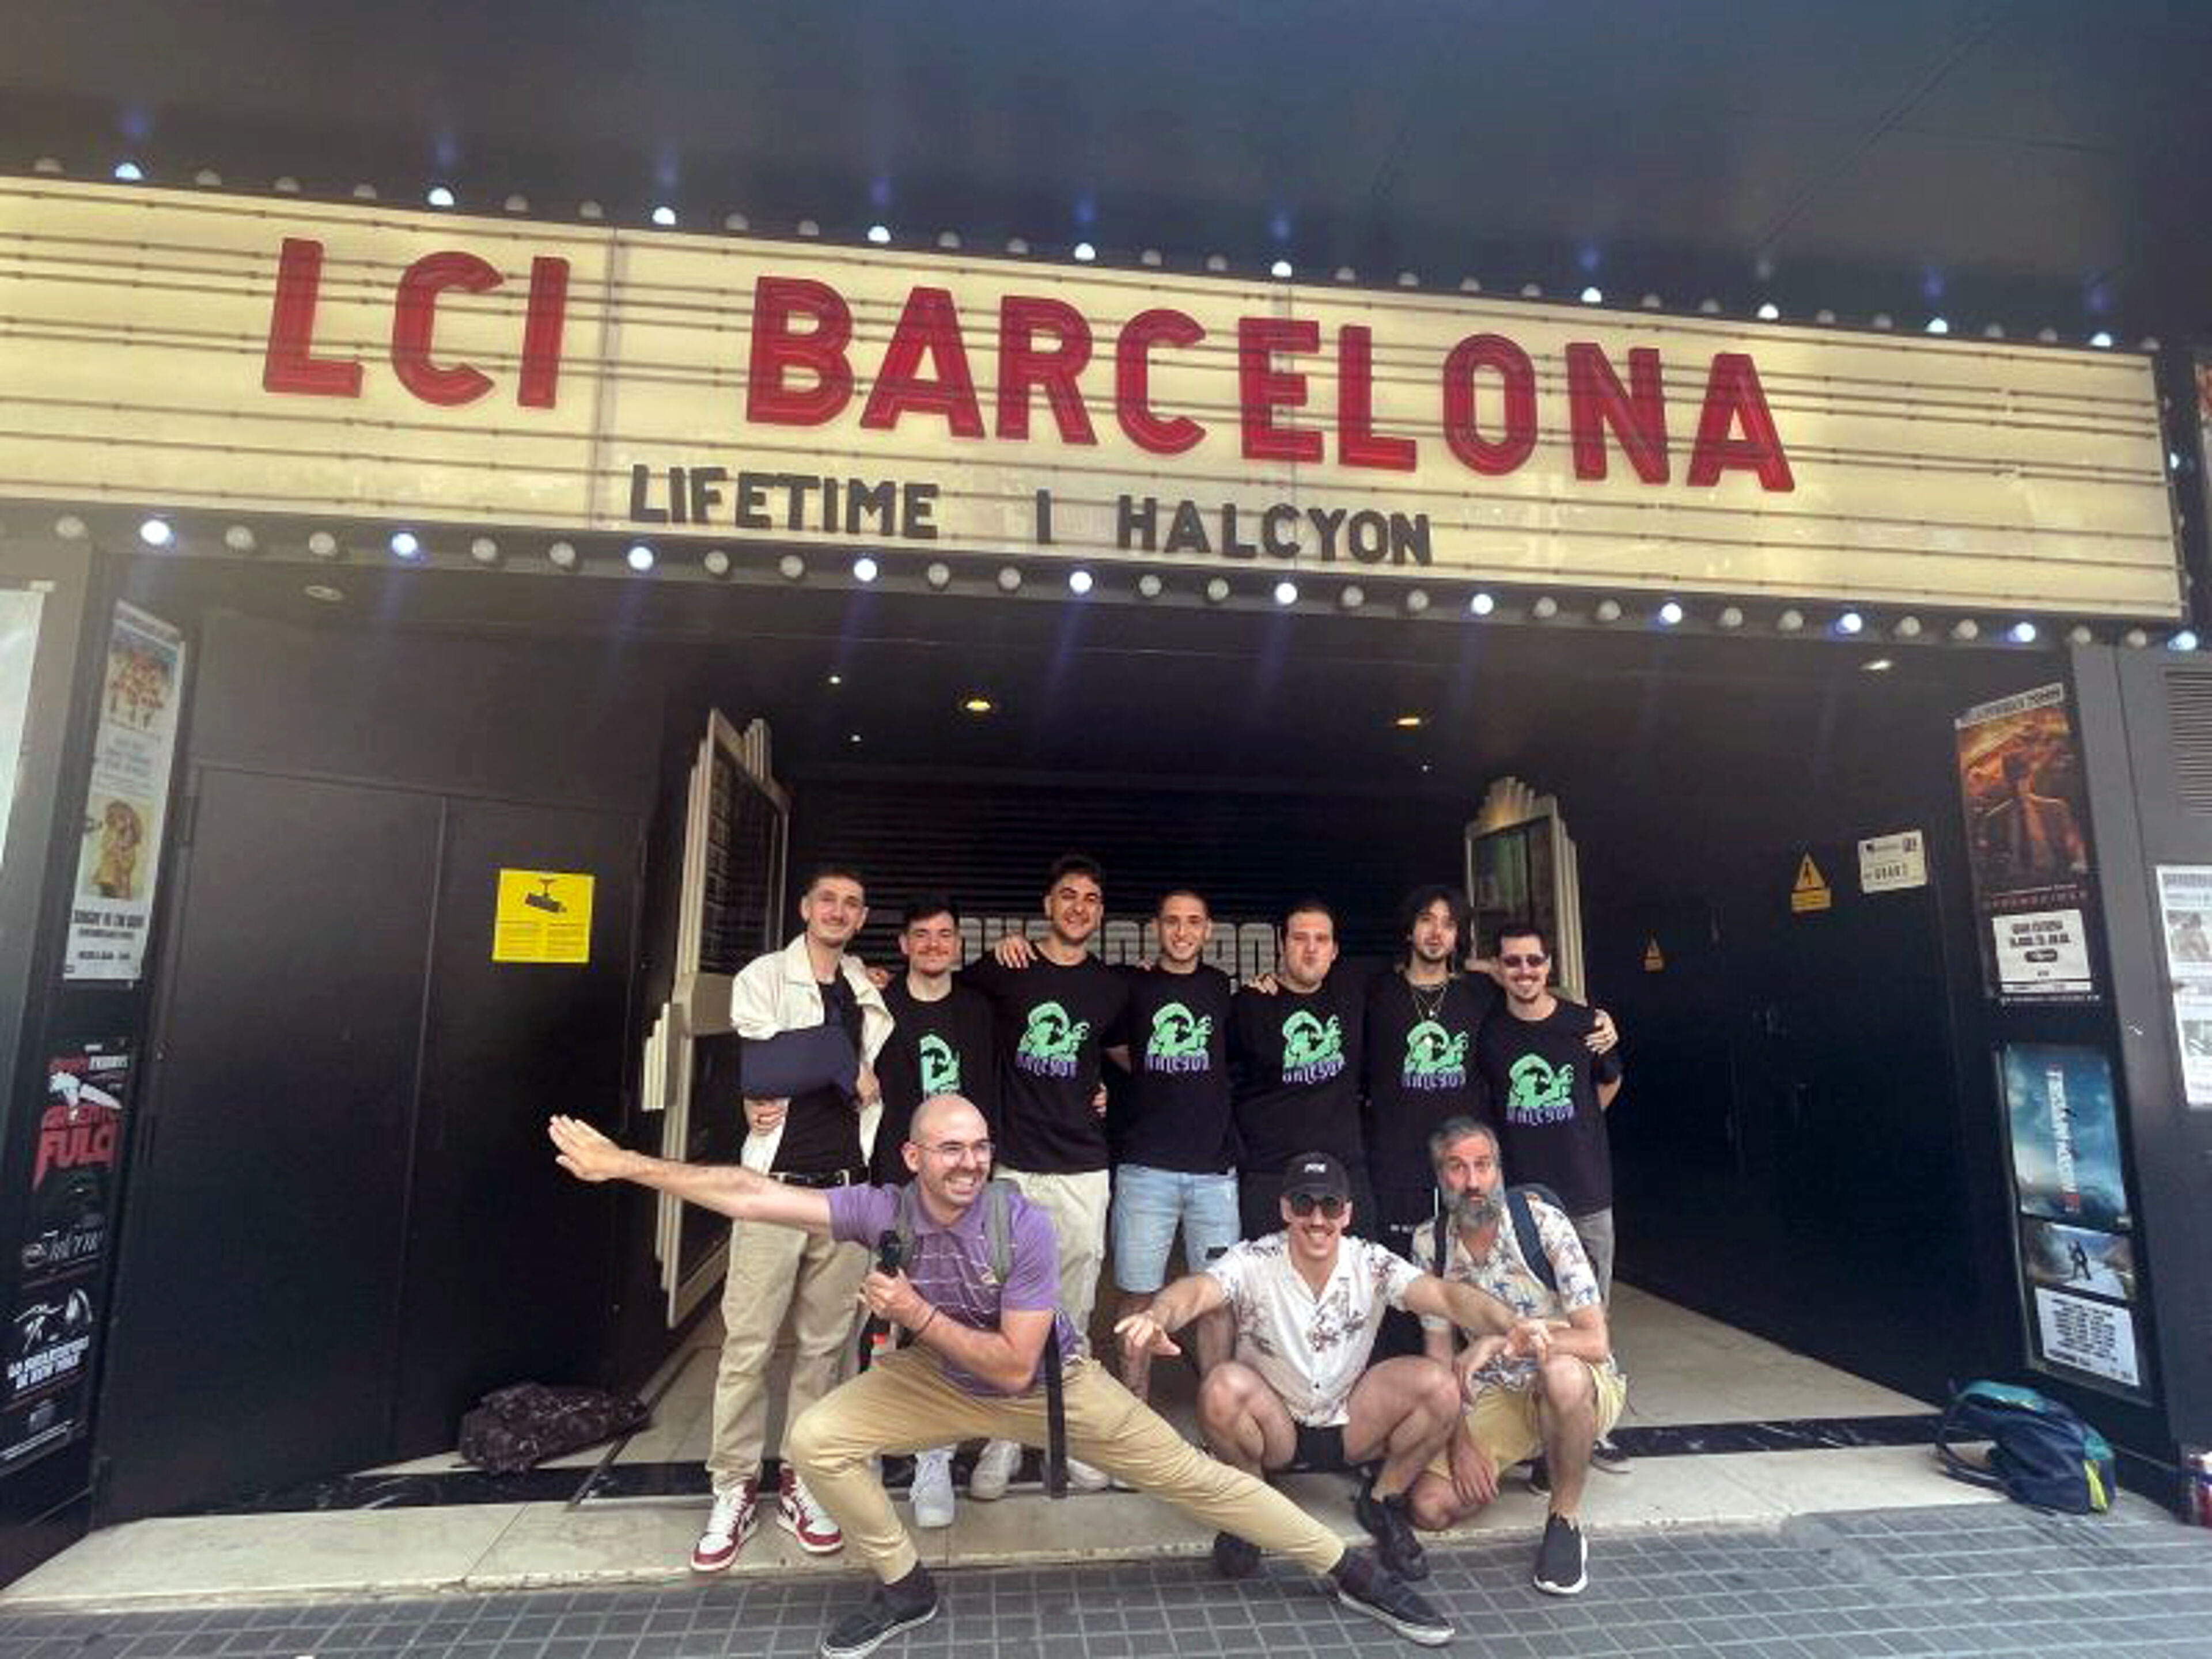 A cheerful group of people posing in front of the LCI Barcelona sign, displaying camaraderie and excitement.